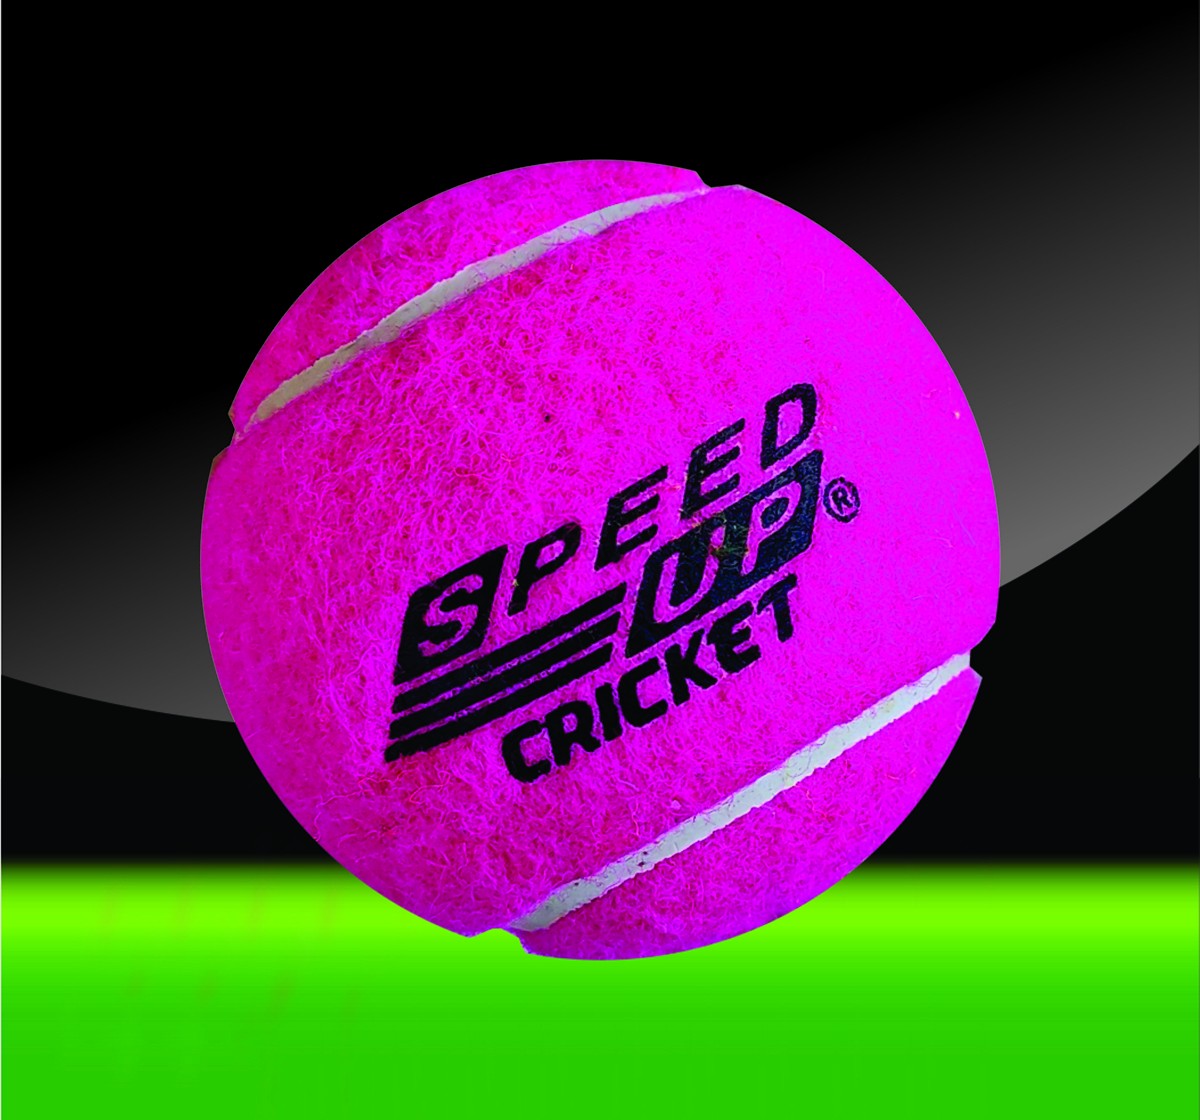 Speed Up Cricket Tennis Ball Pack of 3, Pink for Kids age 10Y+